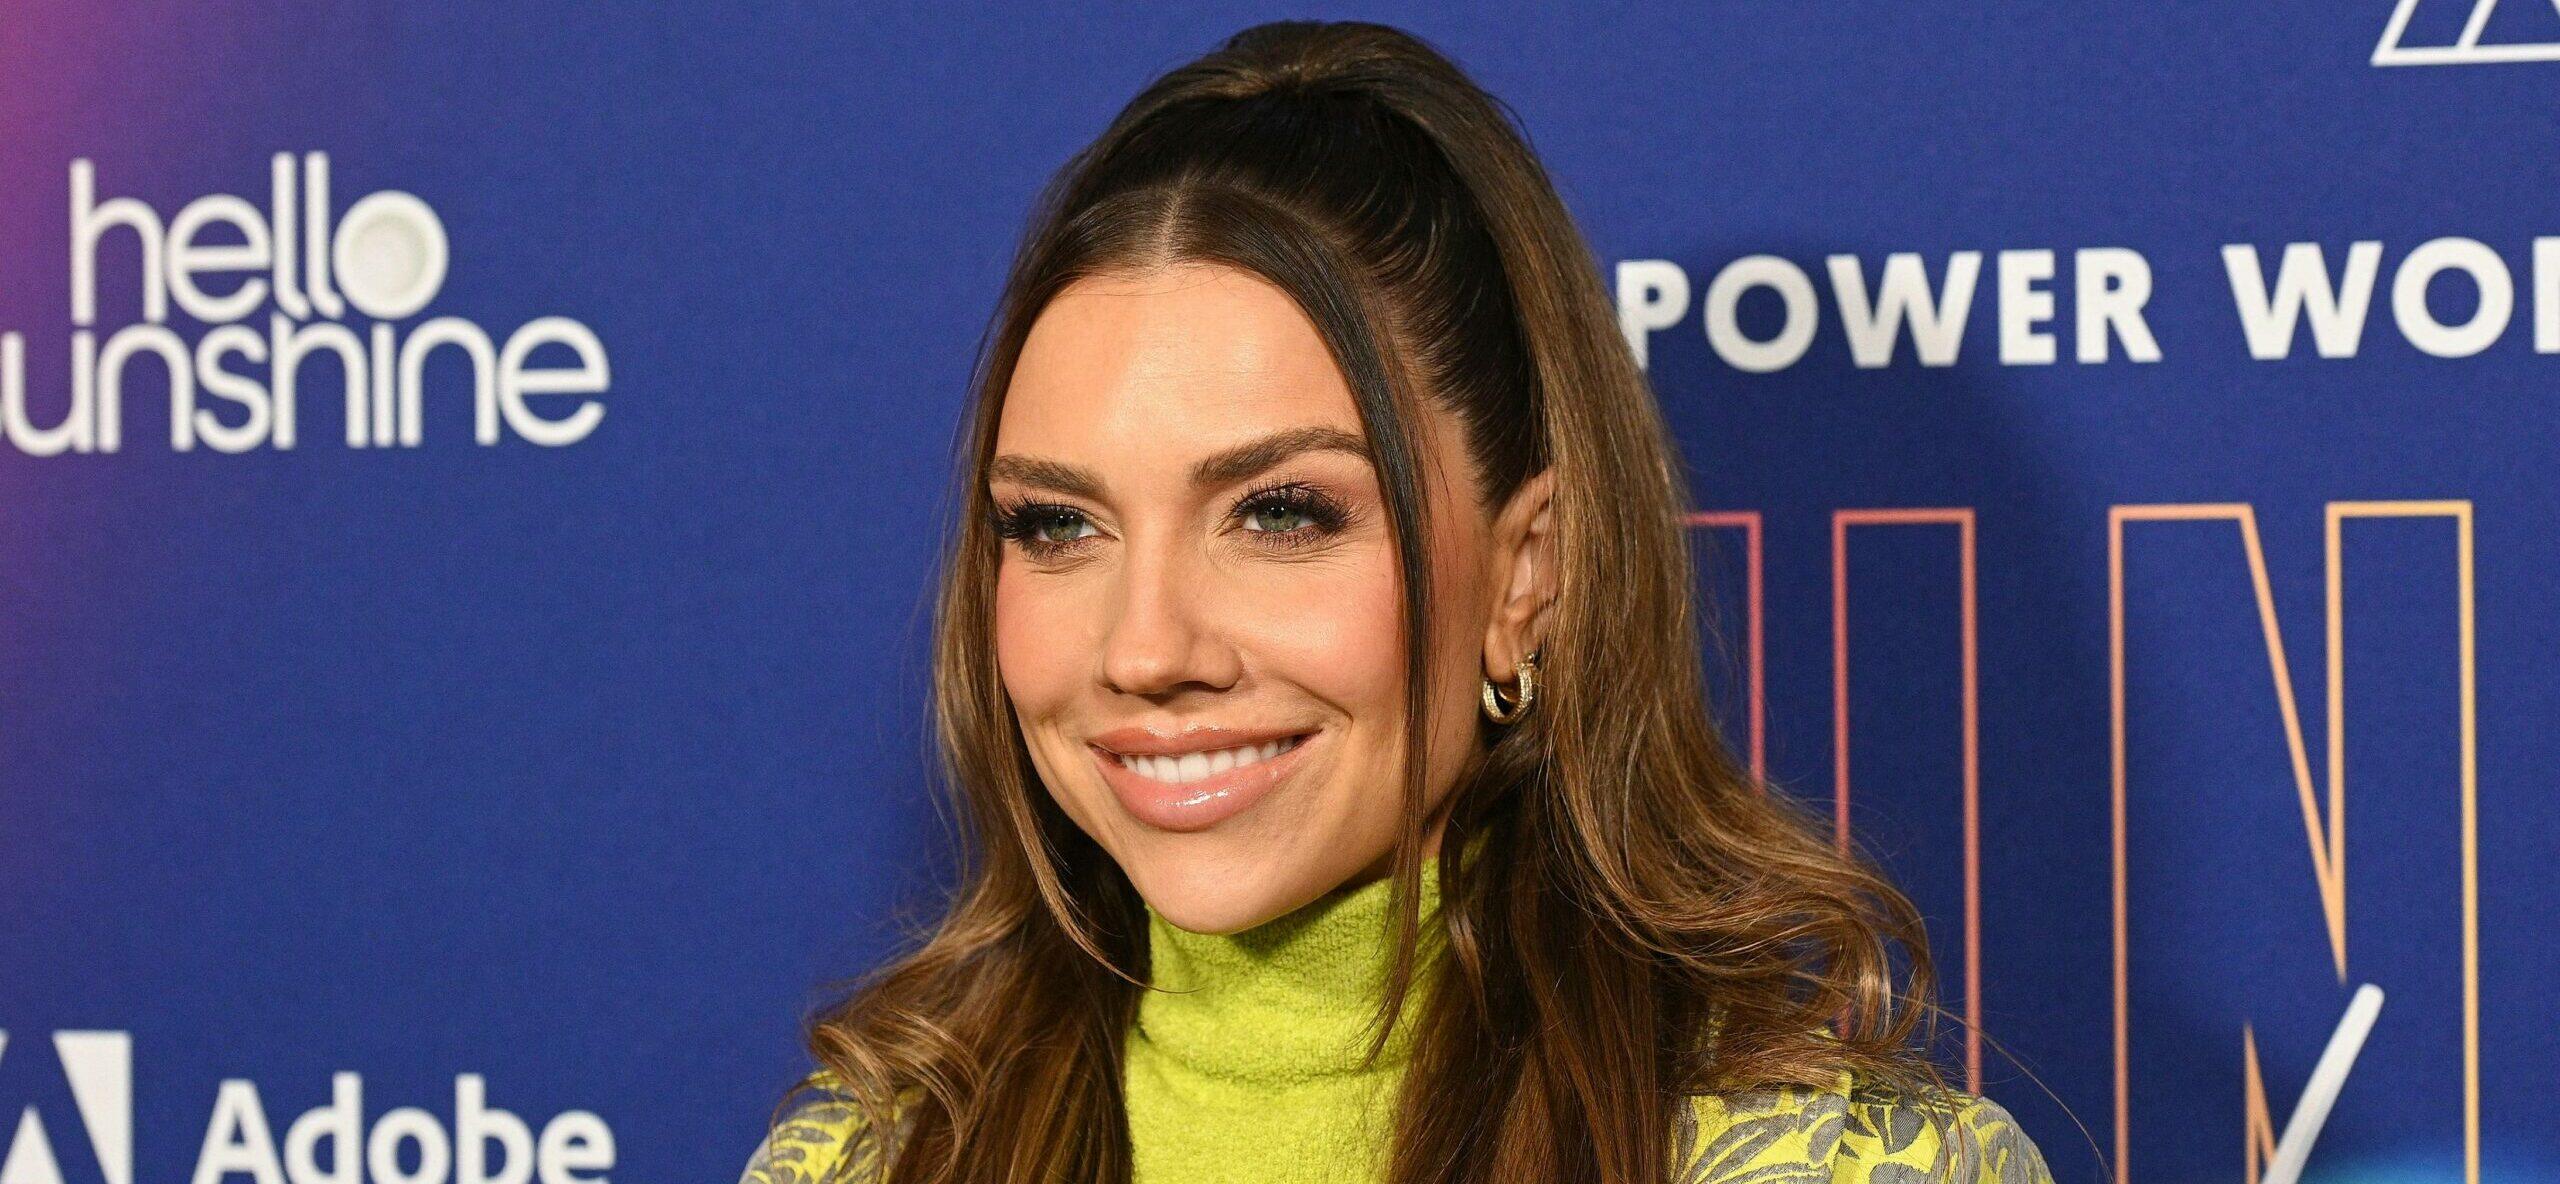 Jenna Johnson Proud To Be A Woman, Thanks Body For Pregnancy